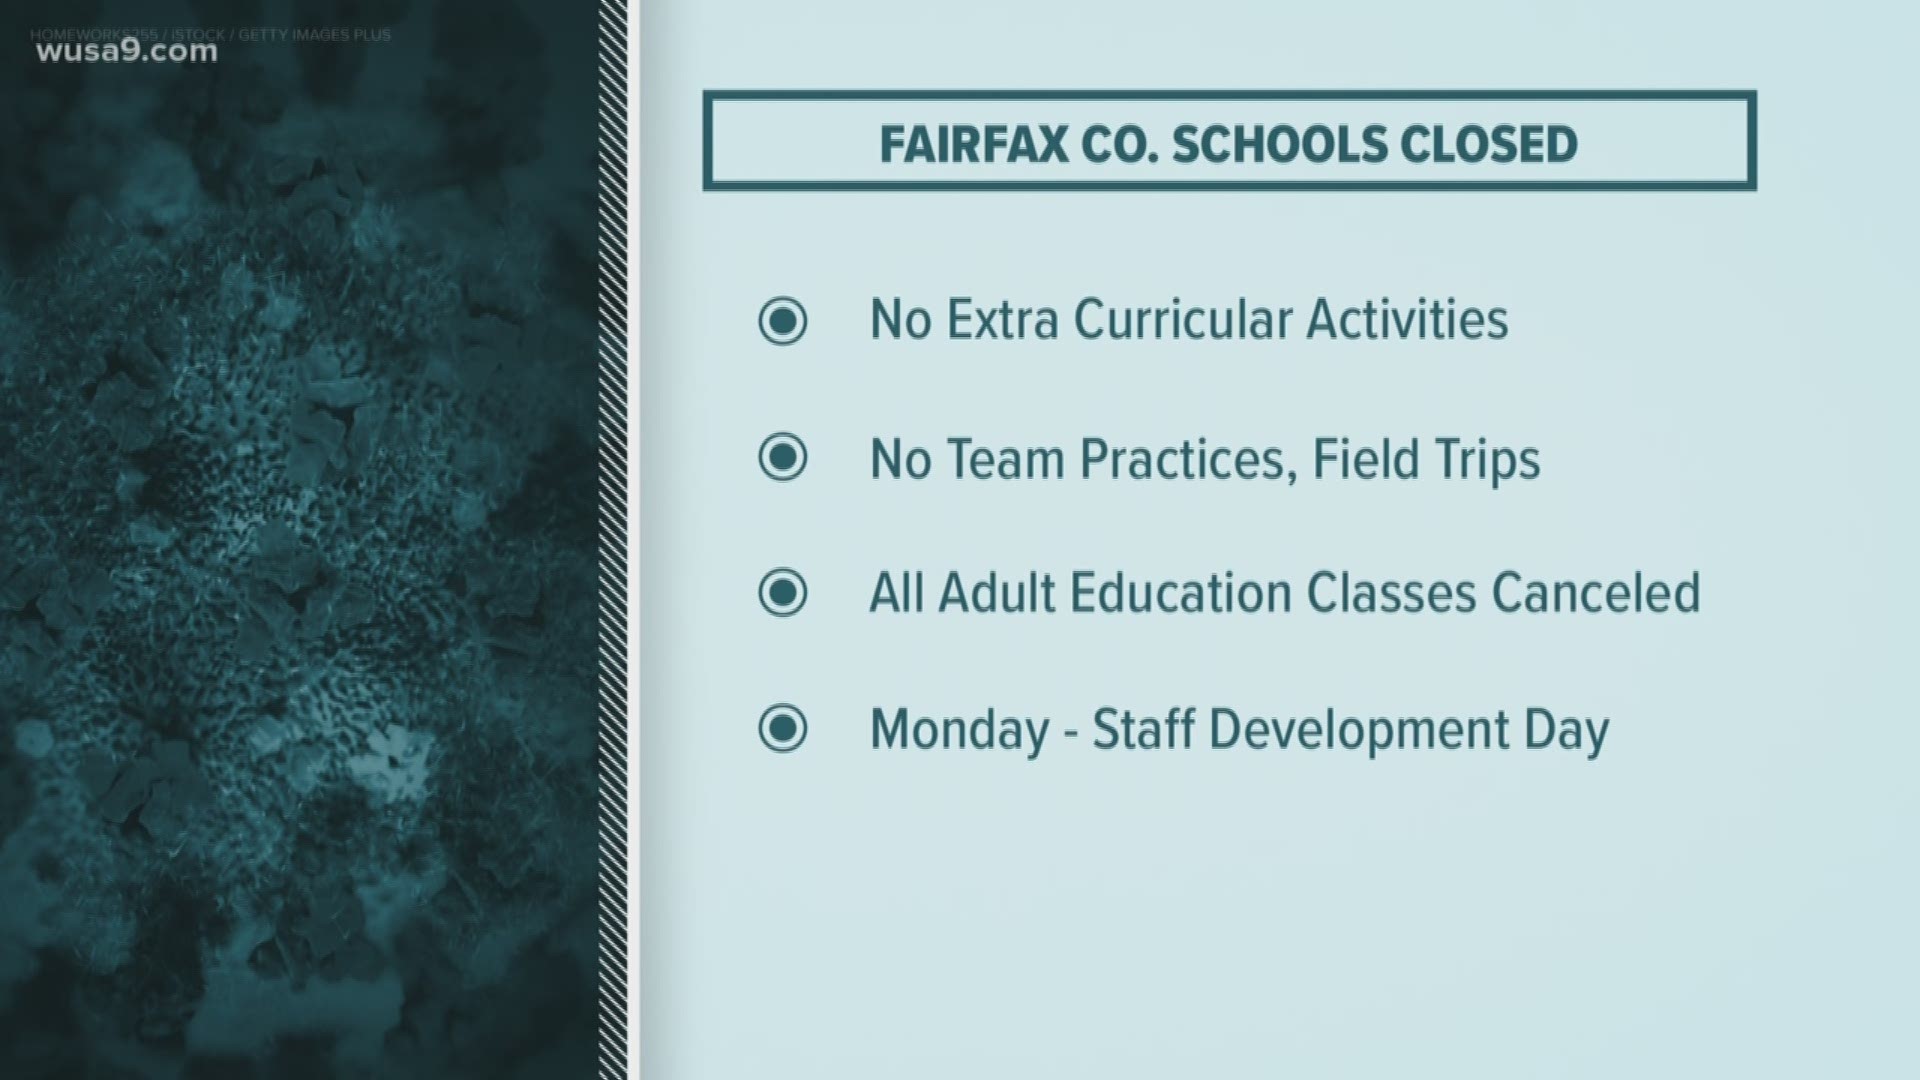 We broke down all the school closures in the DMV area due to coronavirus concerns.